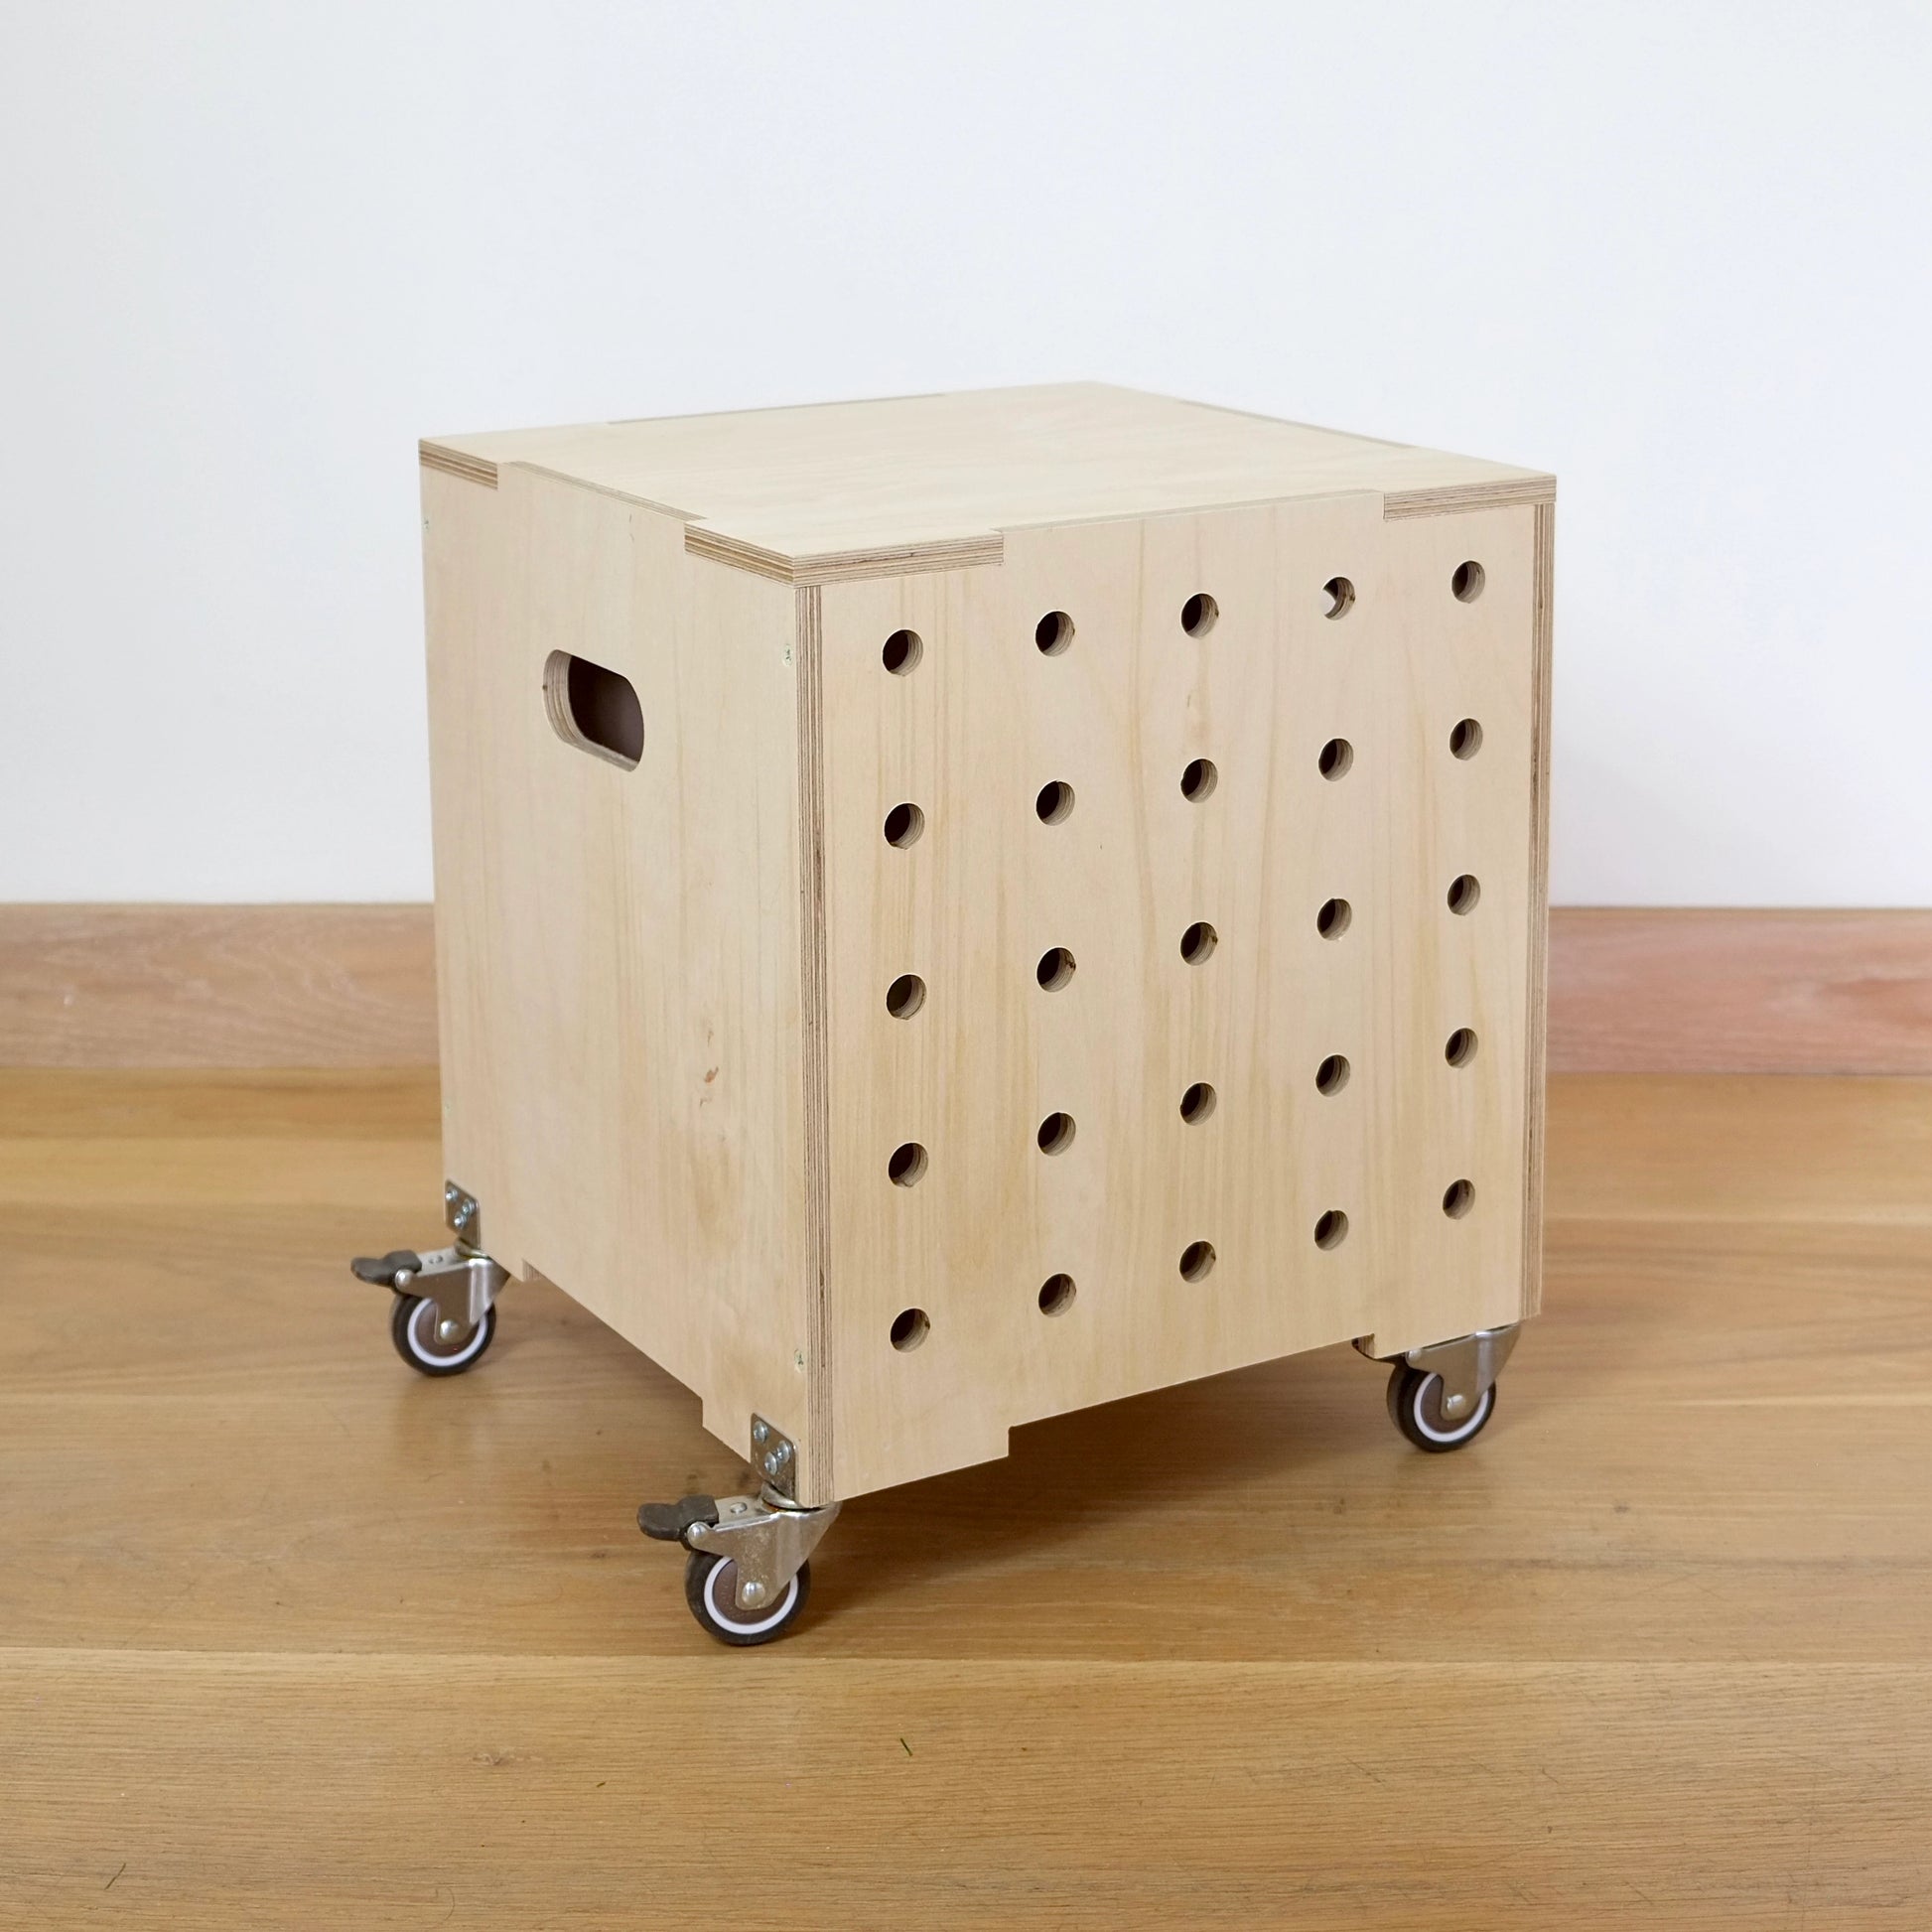 Single birch plywood square wooden box with castors, lid & 5 rows of vertical holes running down front sitting at angle facing the right on a wood floor against a white wall.